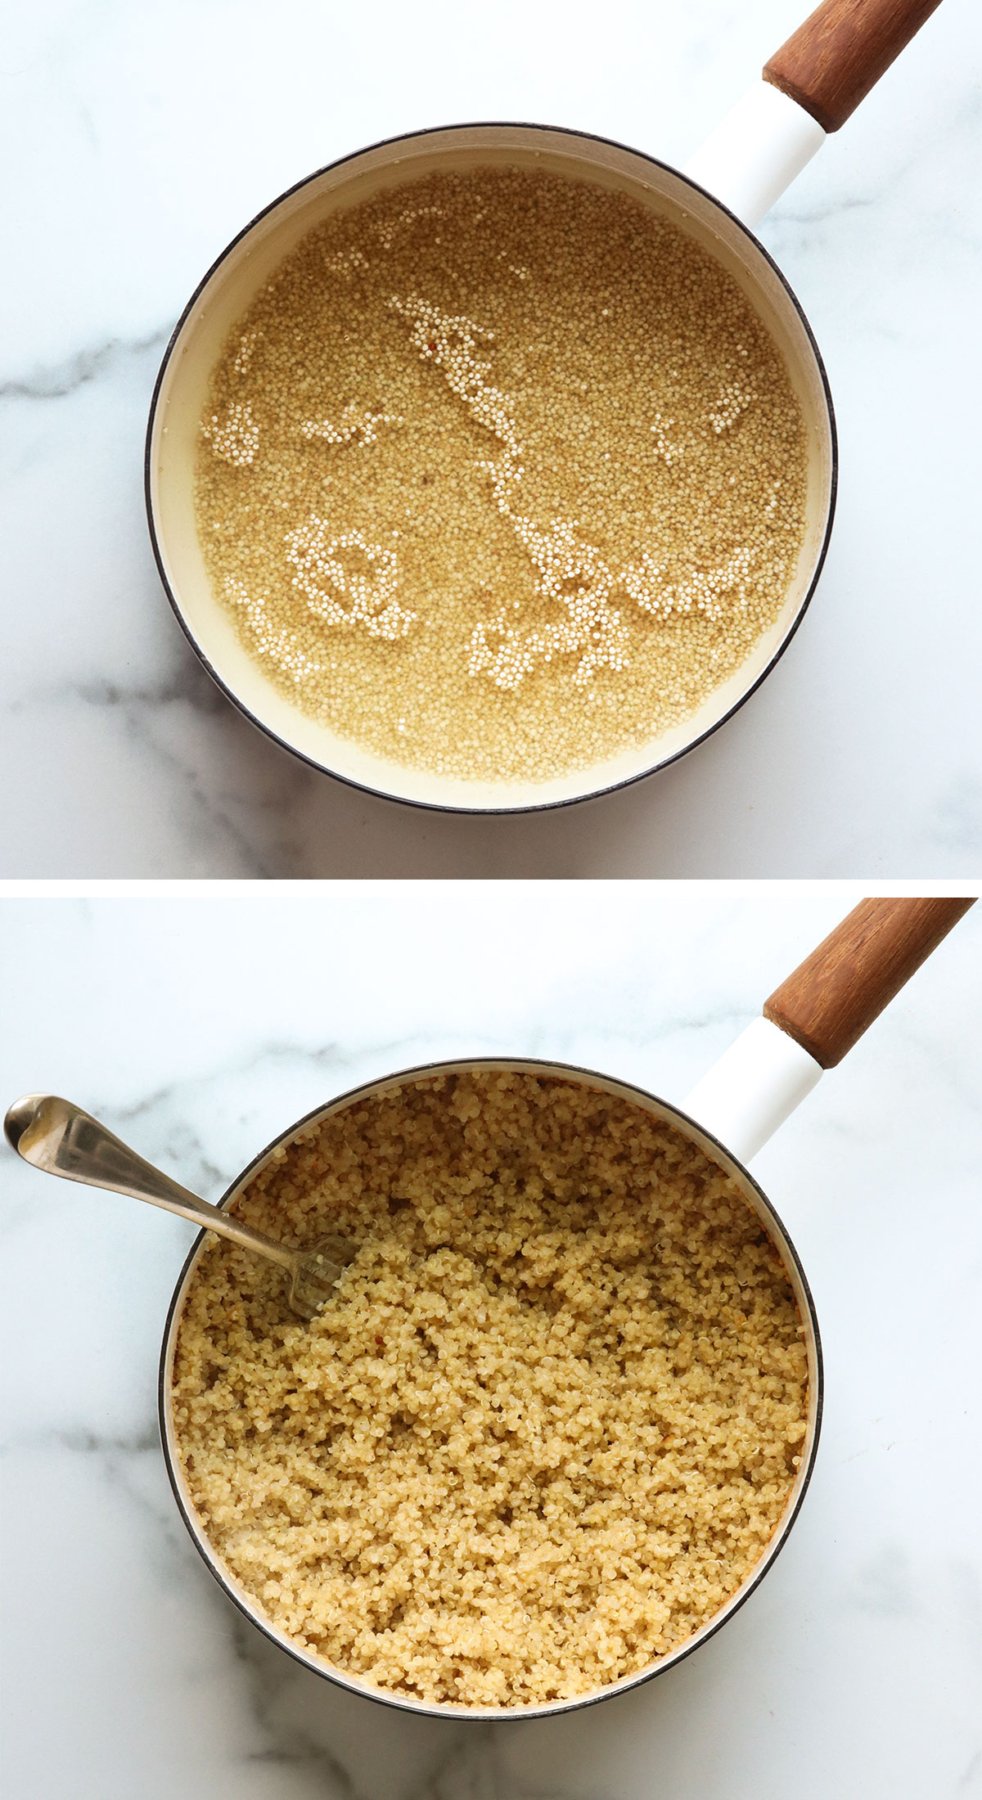 quinoa before and after cooking in a white saucepan.